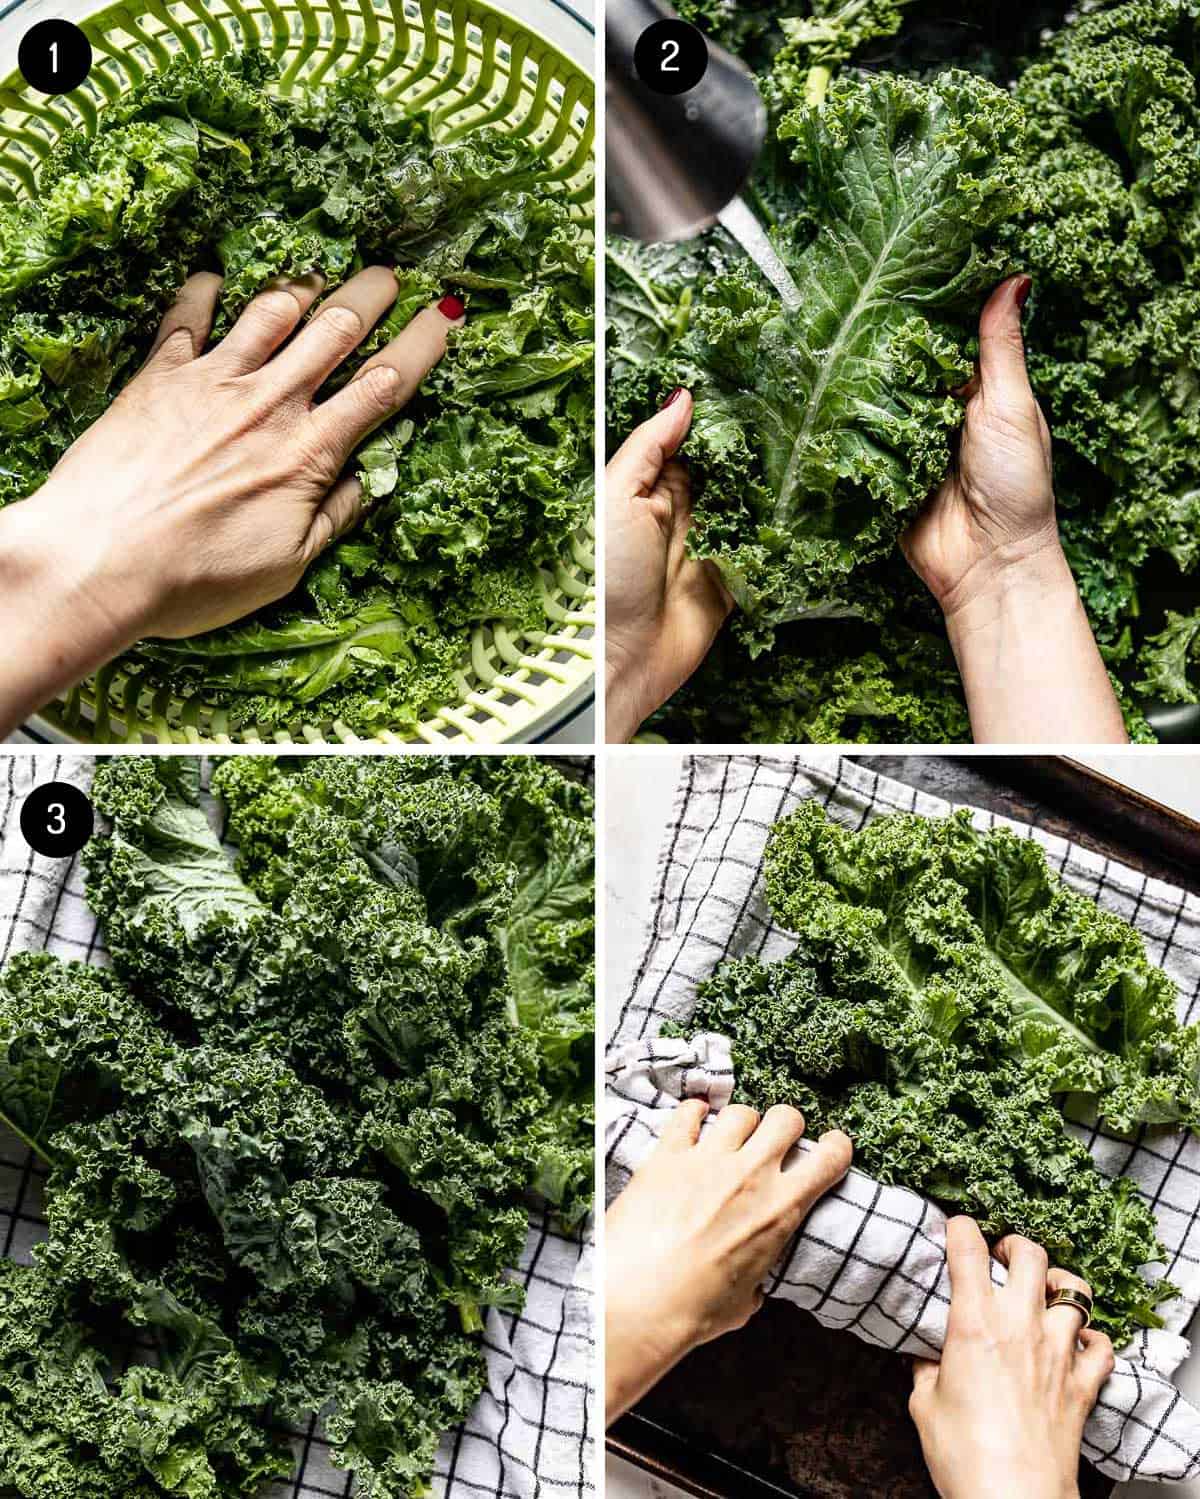 A person washing and drying kale on a kitchen towel from the top view. 